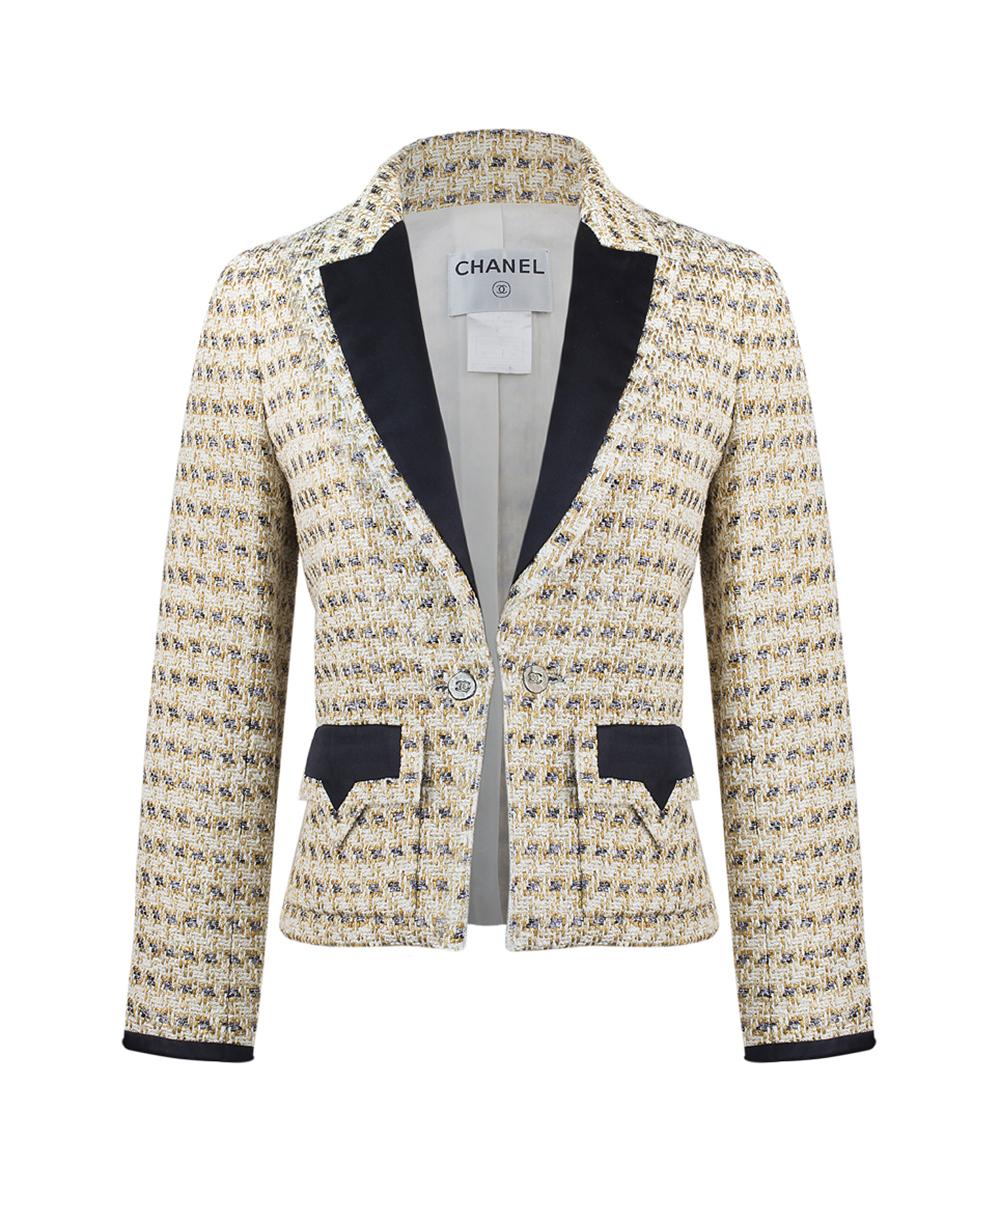 Chanel CC Buttons Metallic Tweed Jacket In Excellent Condition For Sale In Dubai, AE